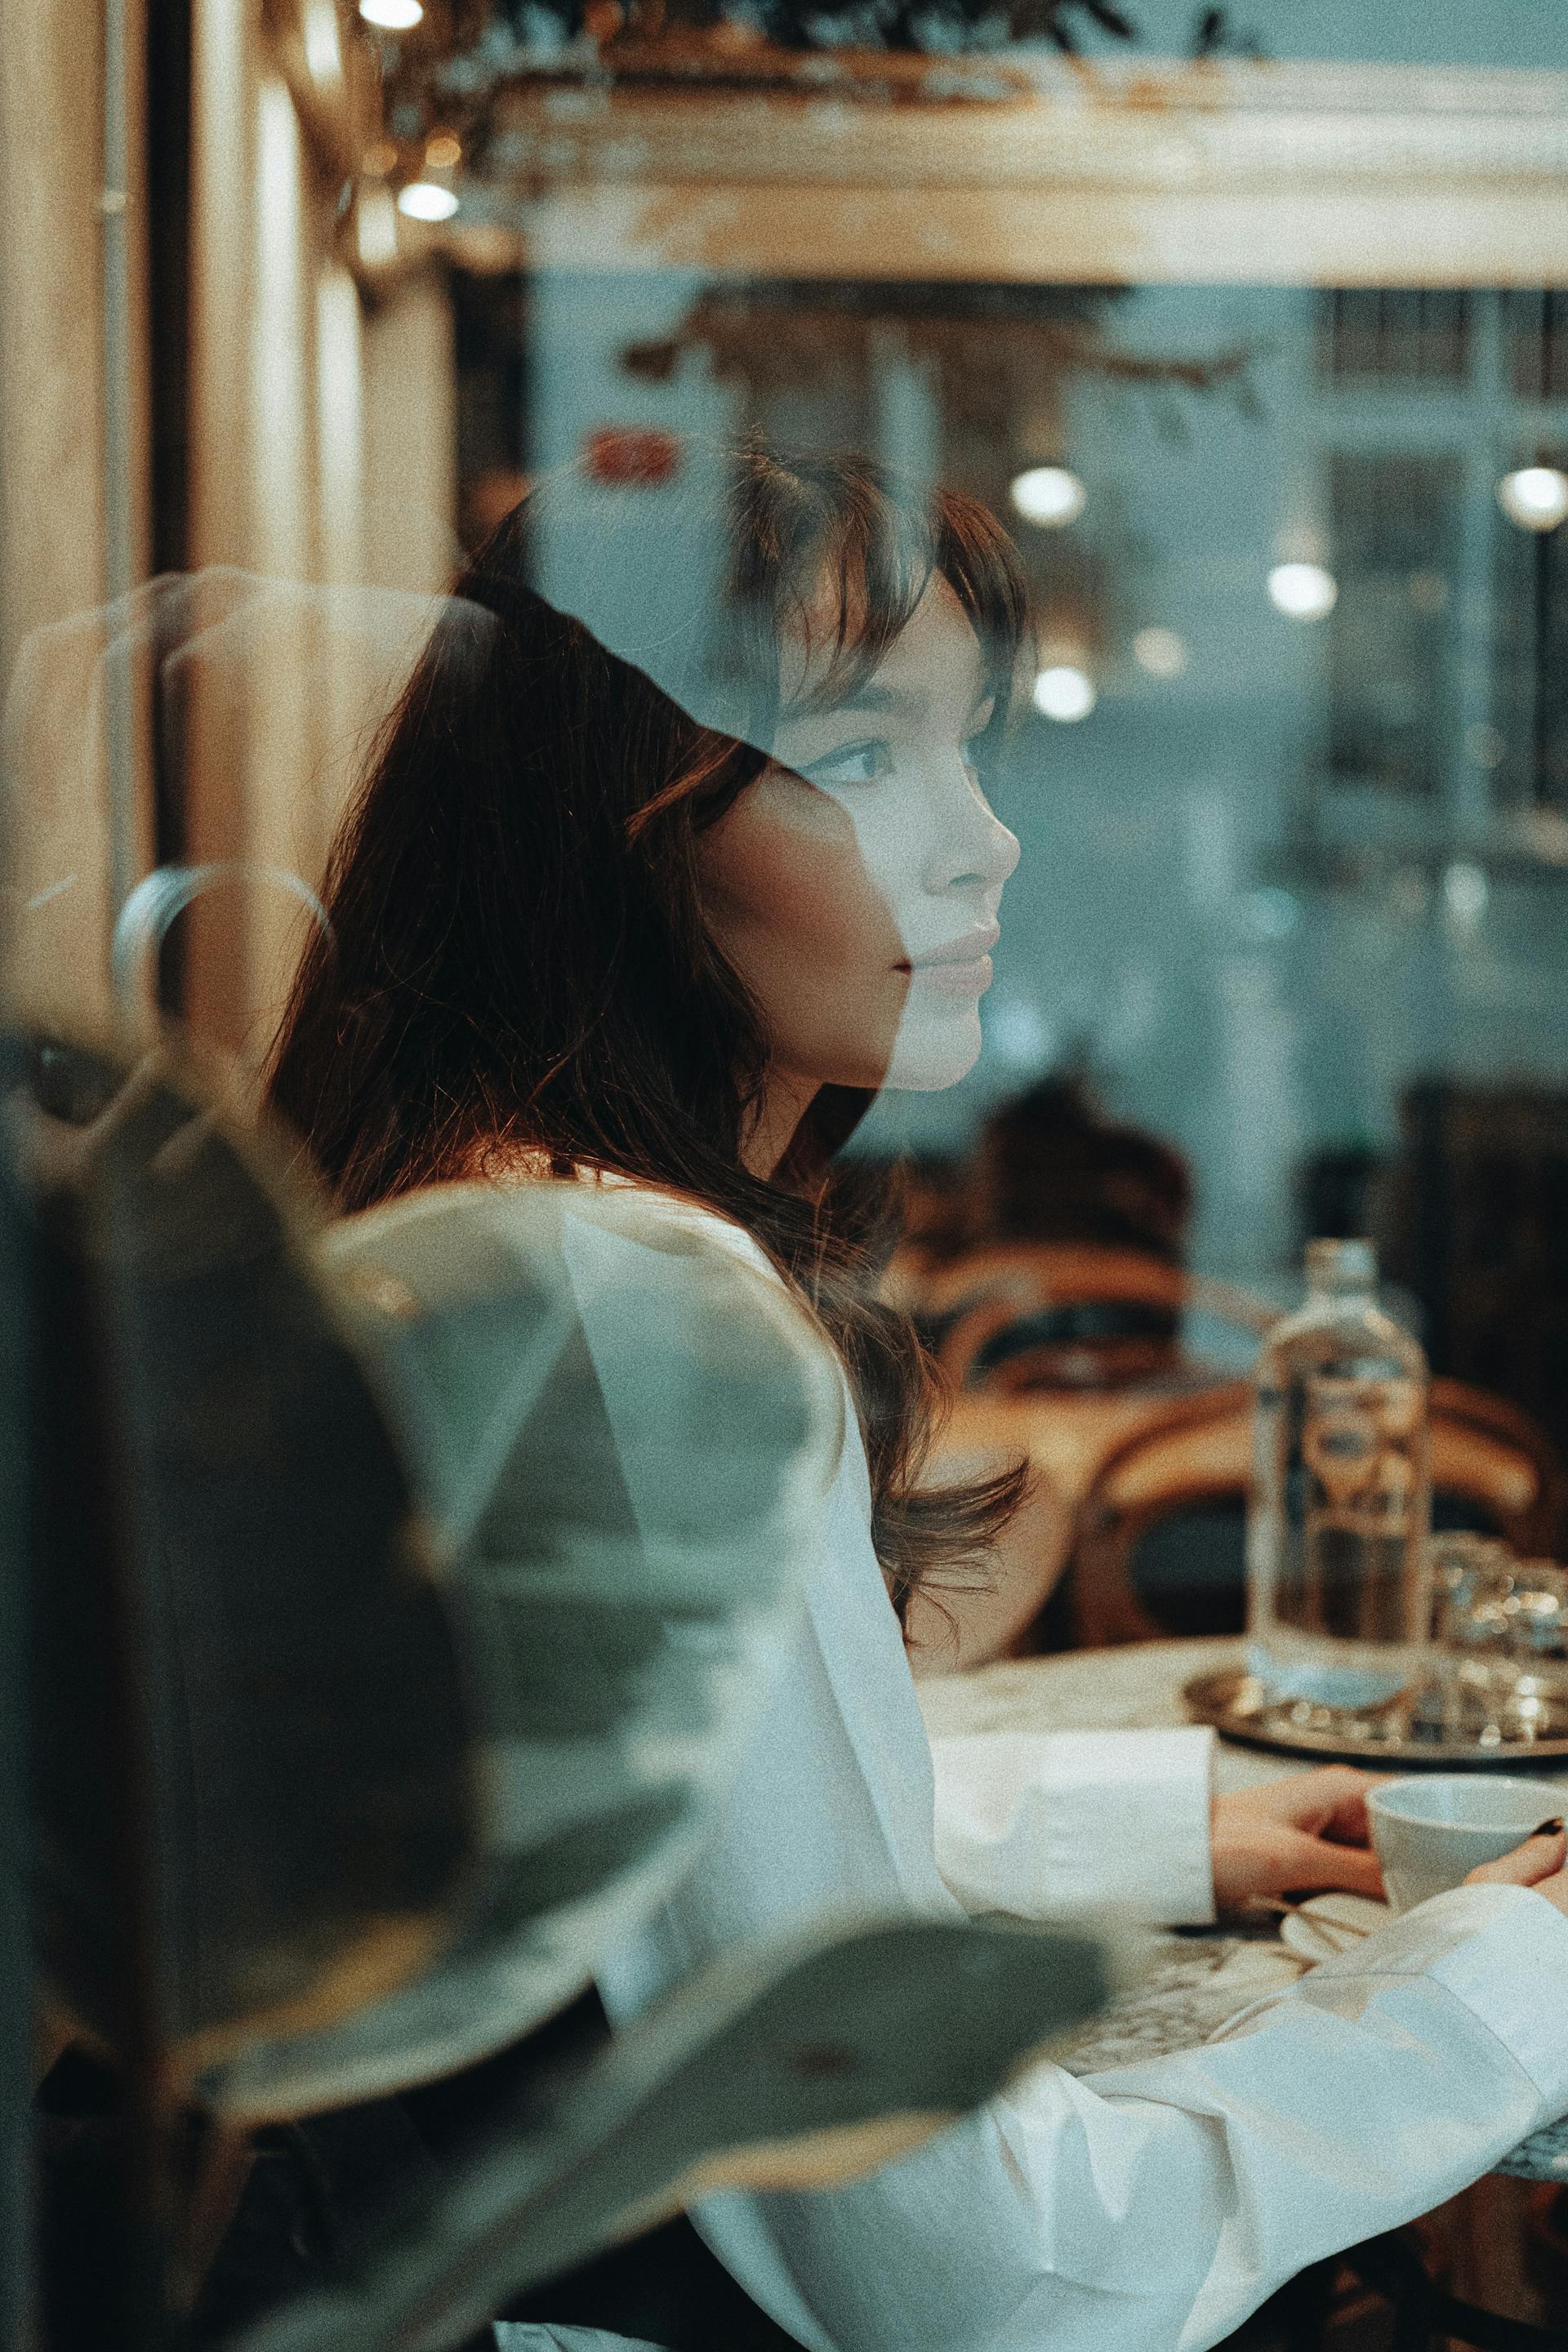 A woman in a cafe | Source: Pexels